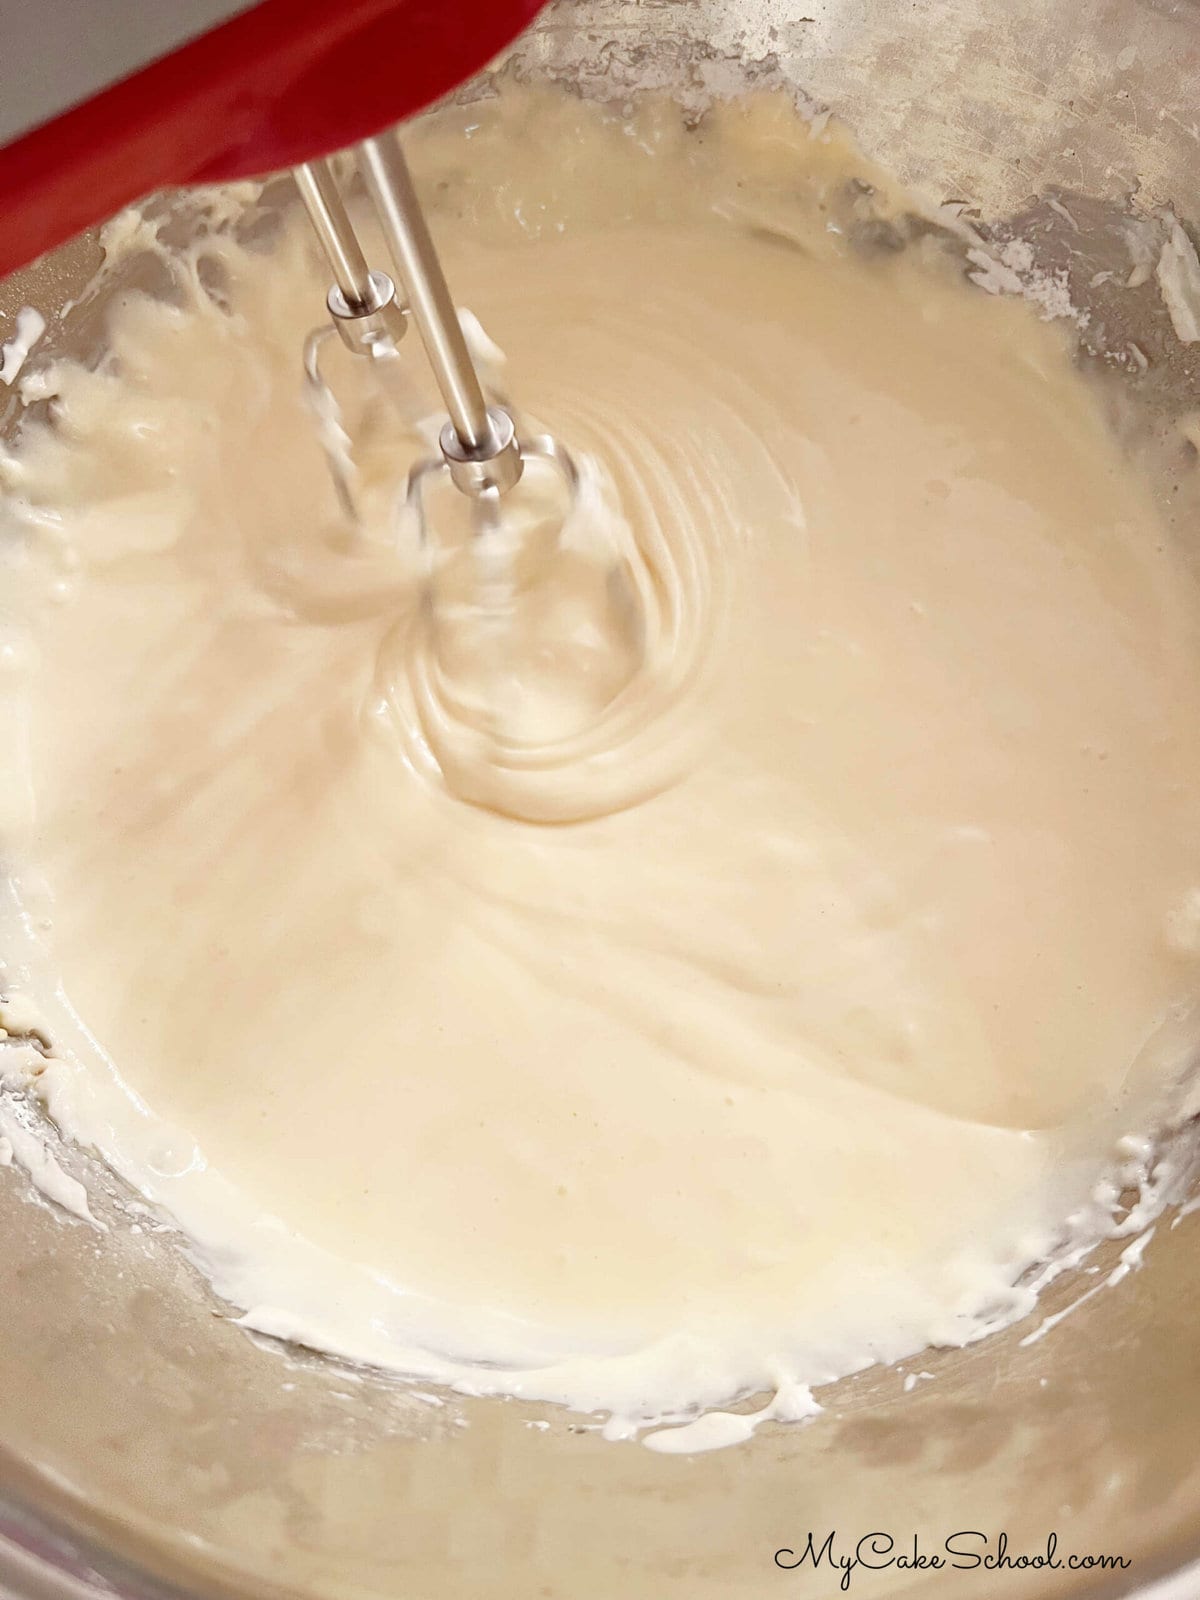 Mixing the cheesecake batter